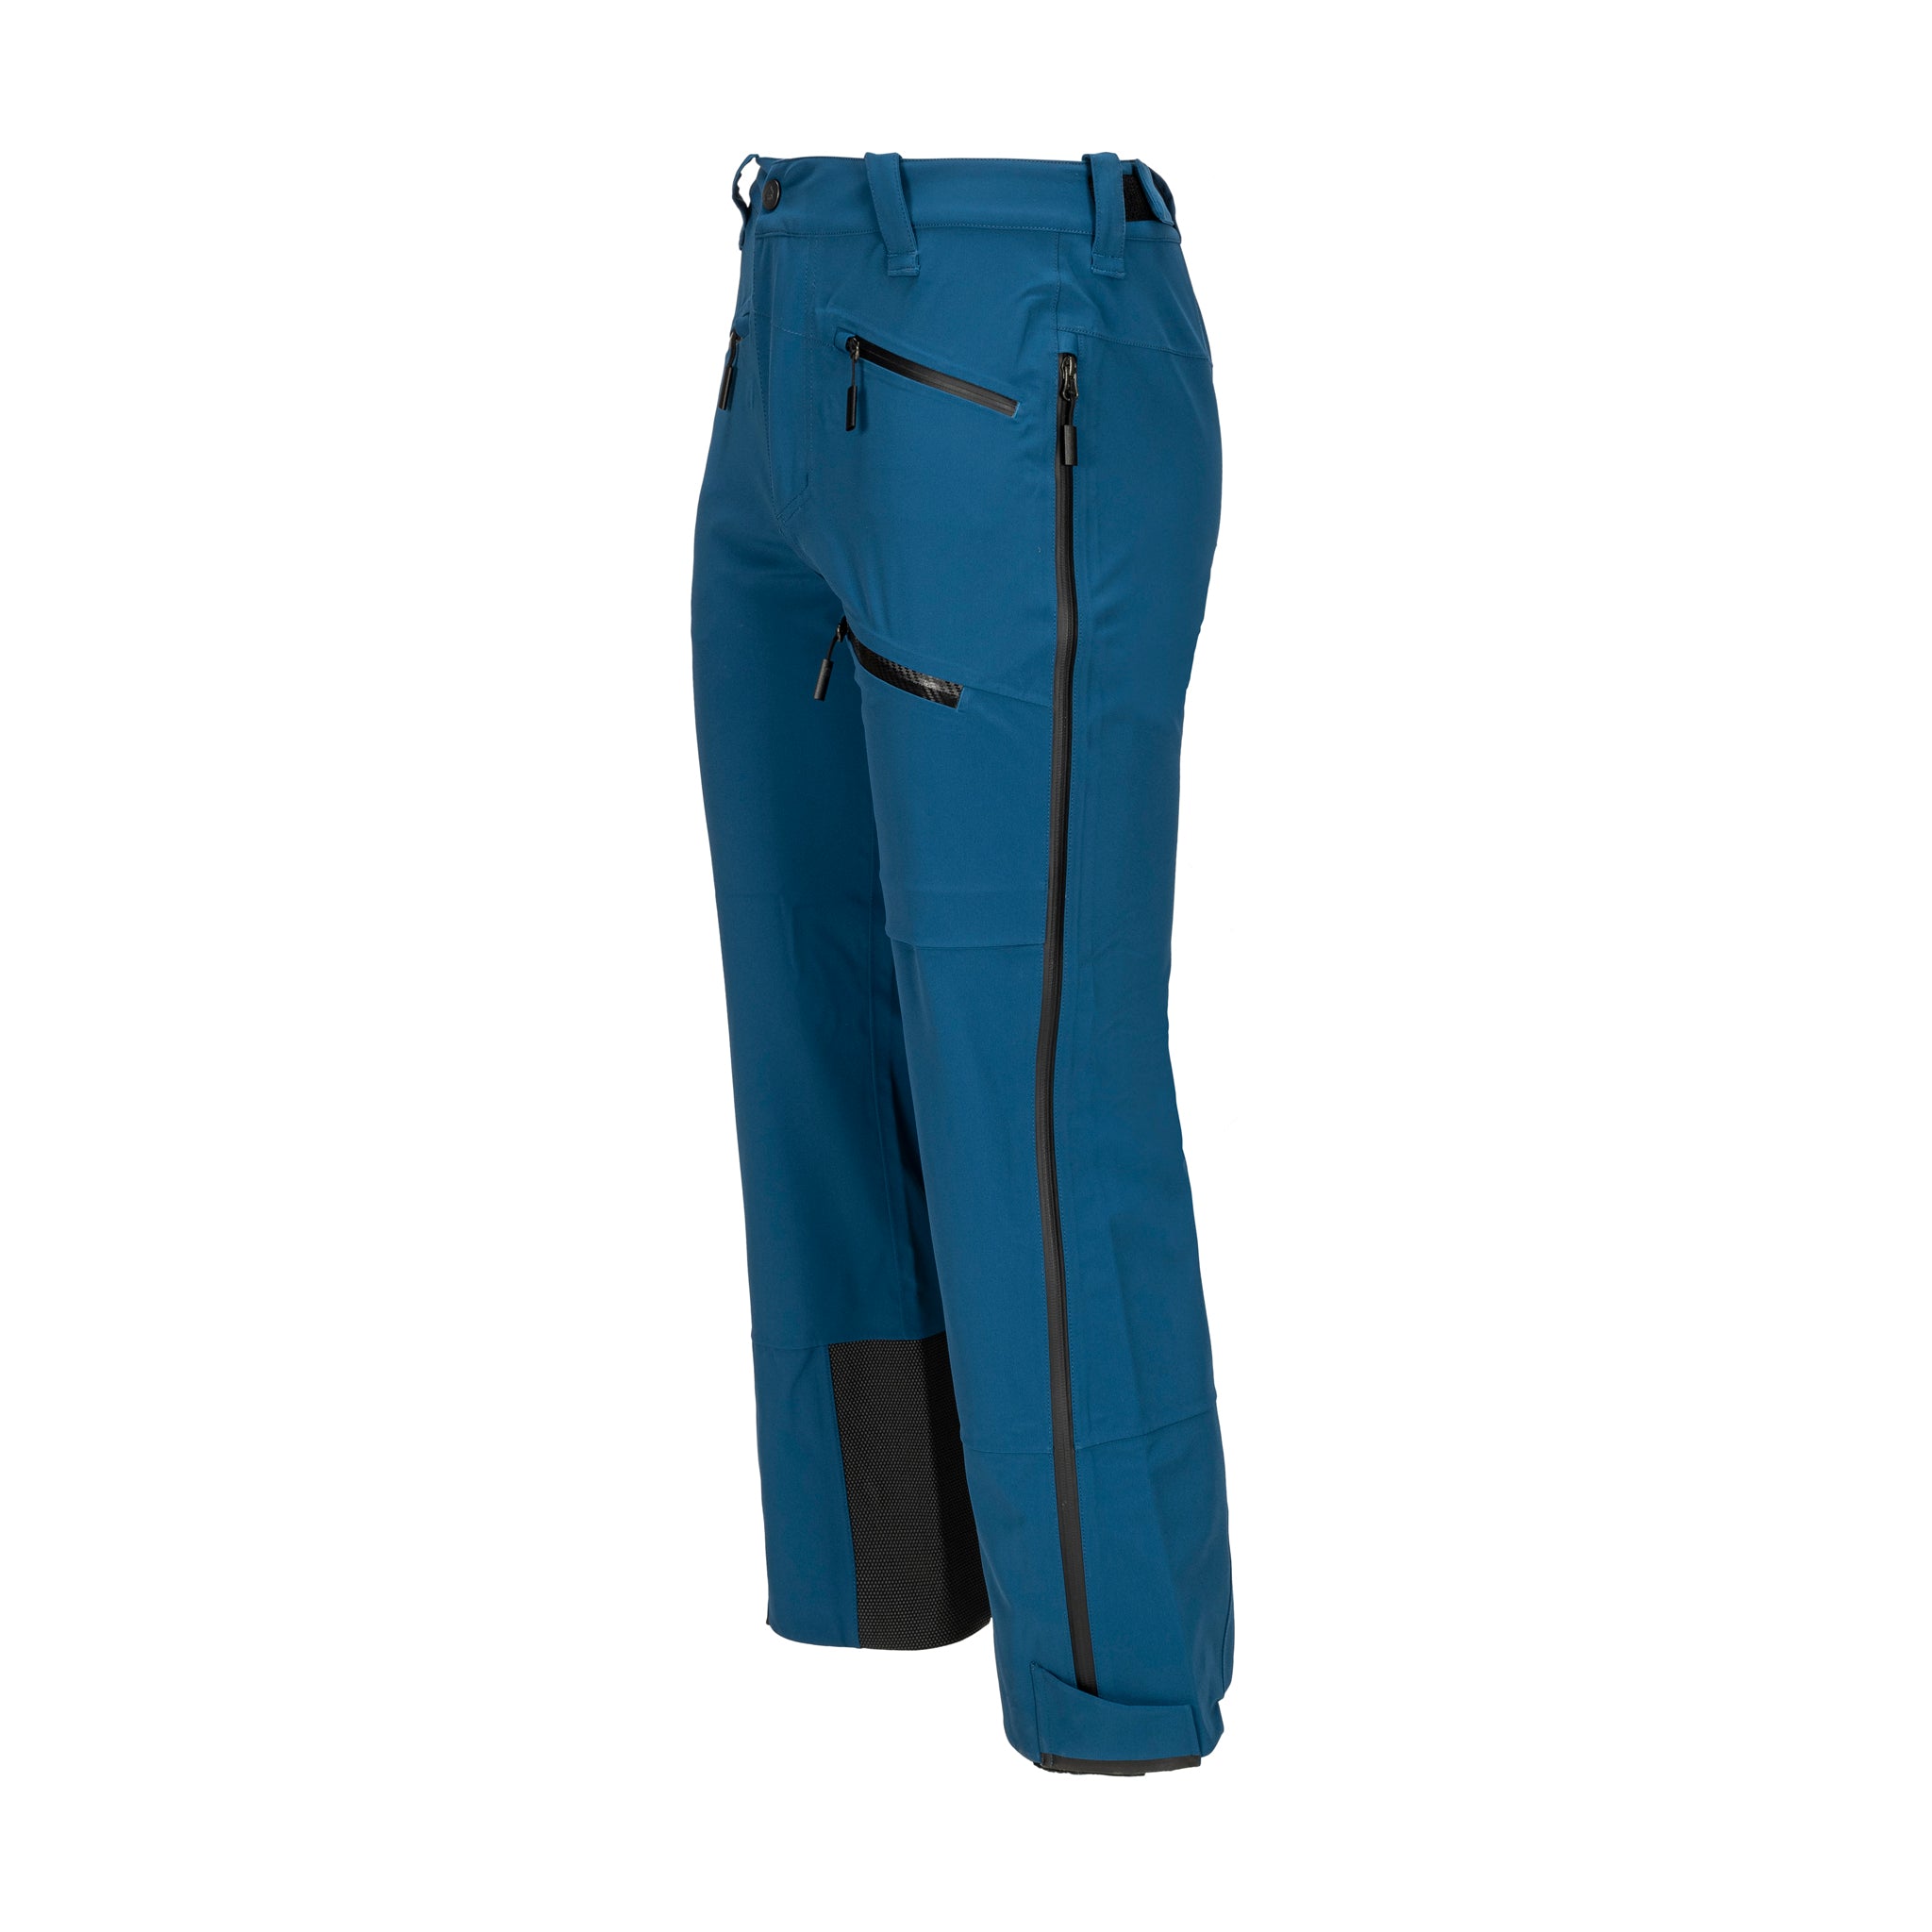 Boys' Performance Pants - All in Motion Navy S, Blue 